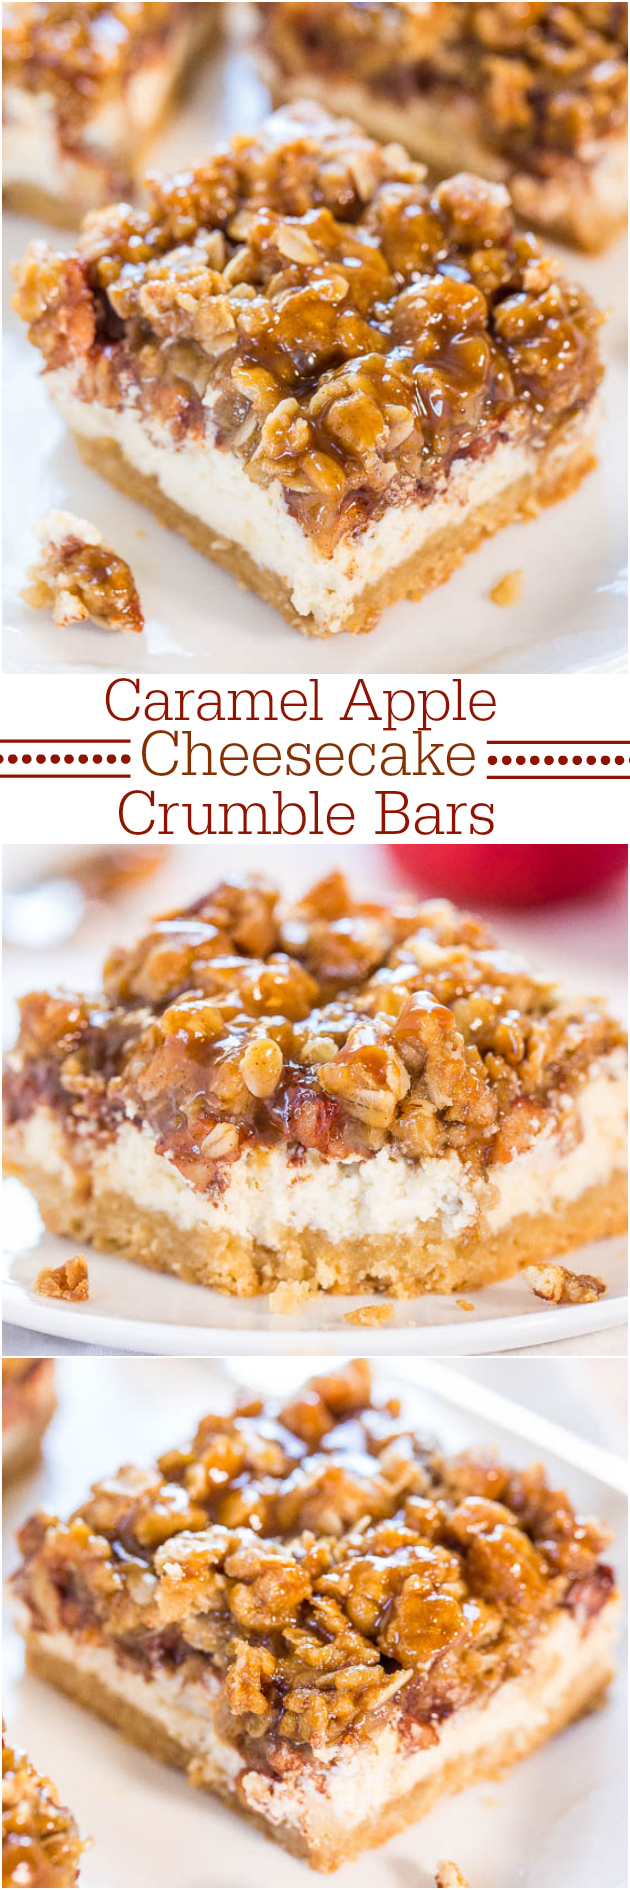 Caramel Apple Cheesecake Bars - Move over apple pie! These are an apple pie, apple crumble and cheesecake all in one! YUM!